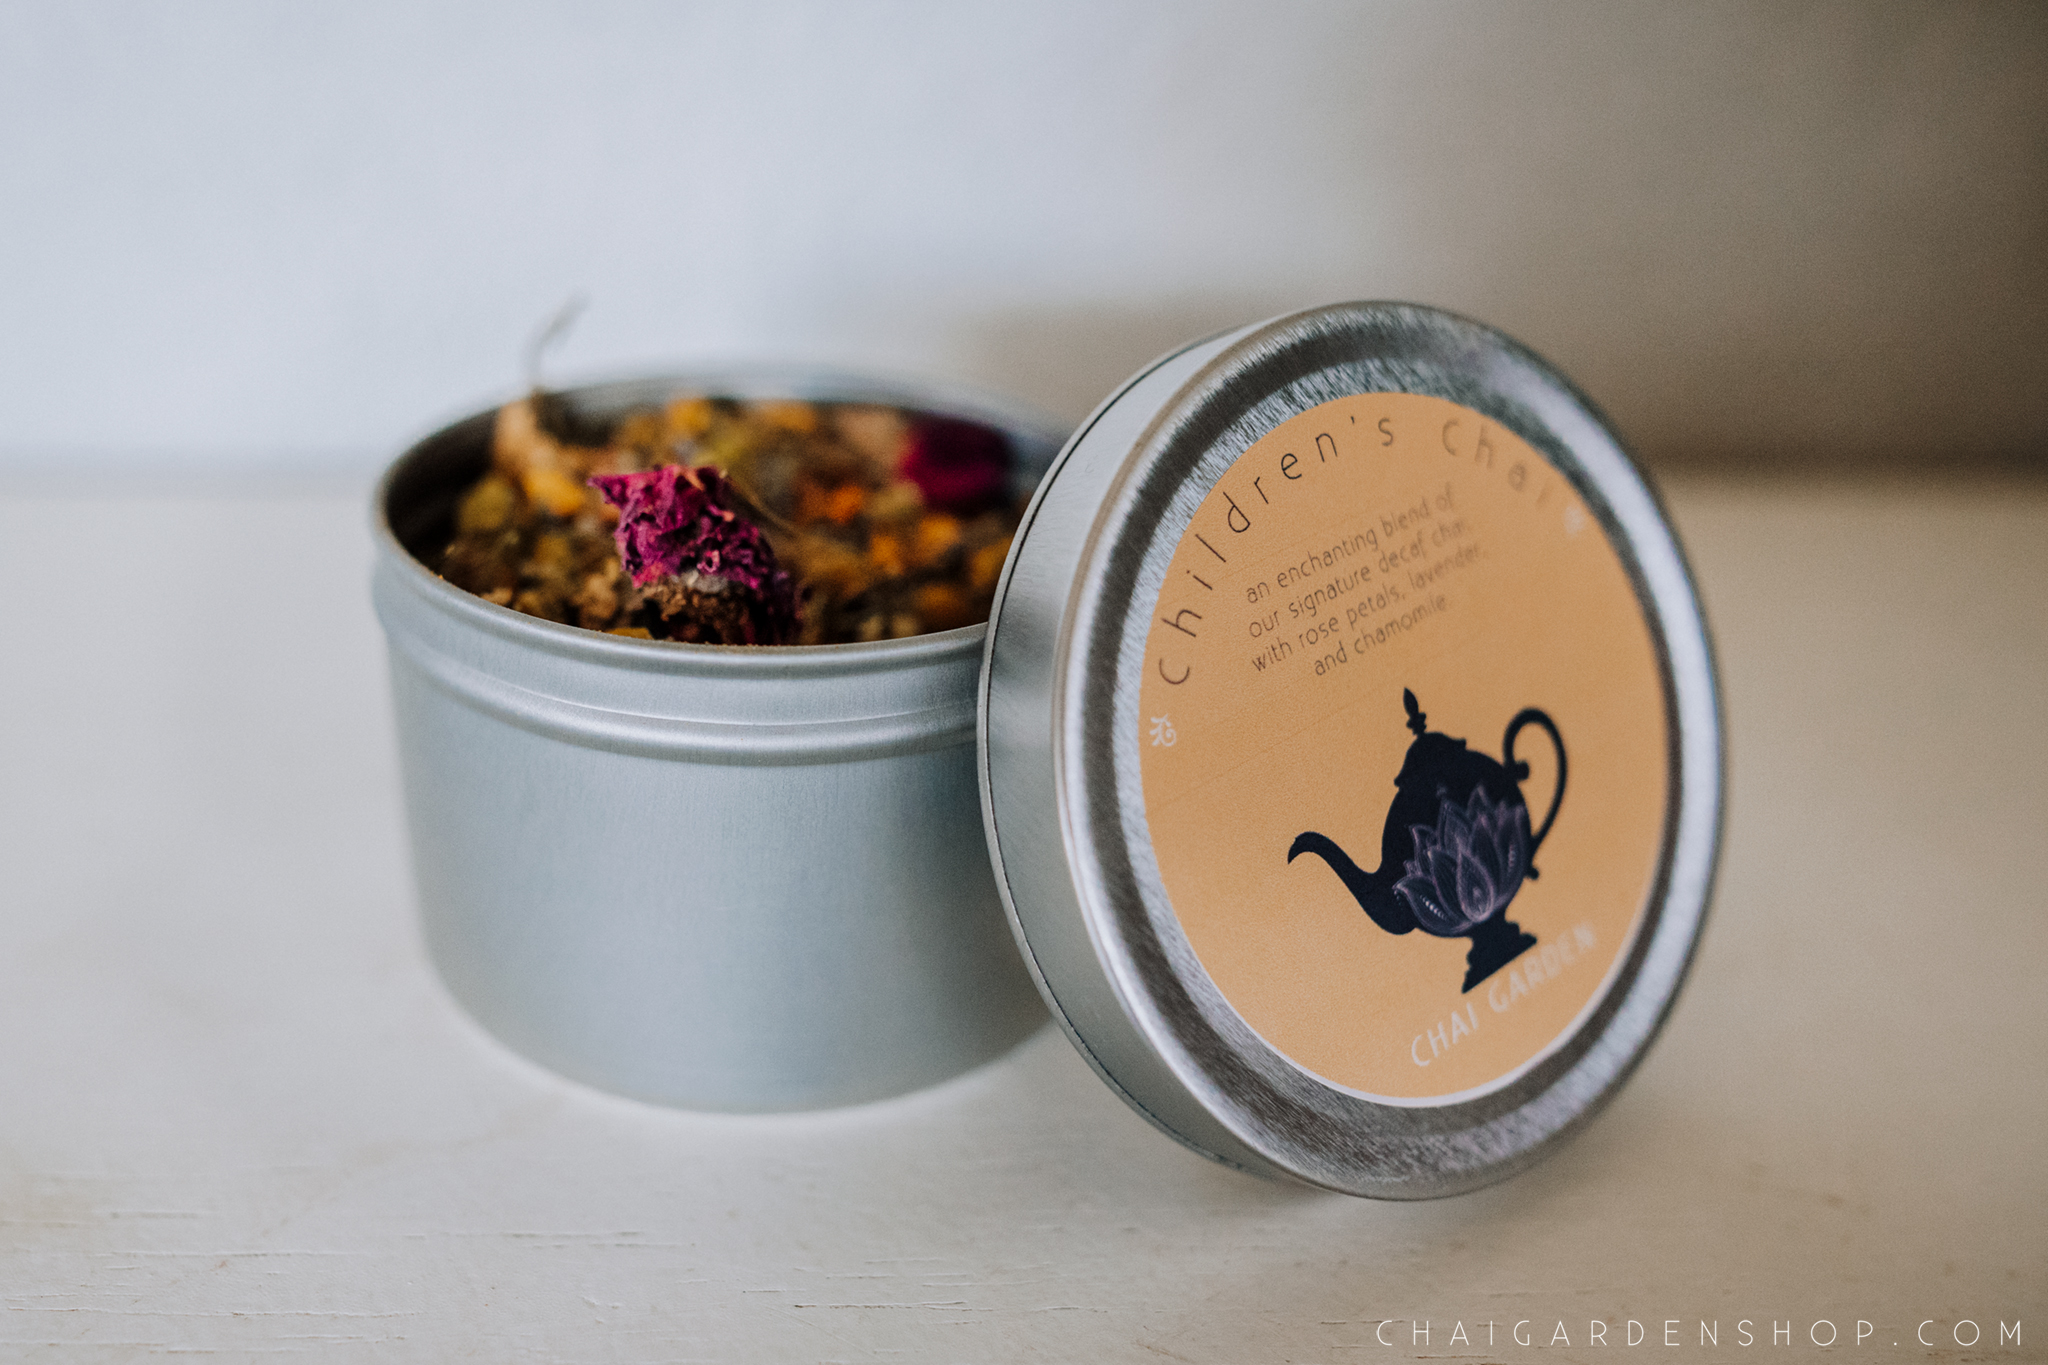 Rose Petal Chai - Organic, Authentic Chai, with a Hint of Healing Herbs